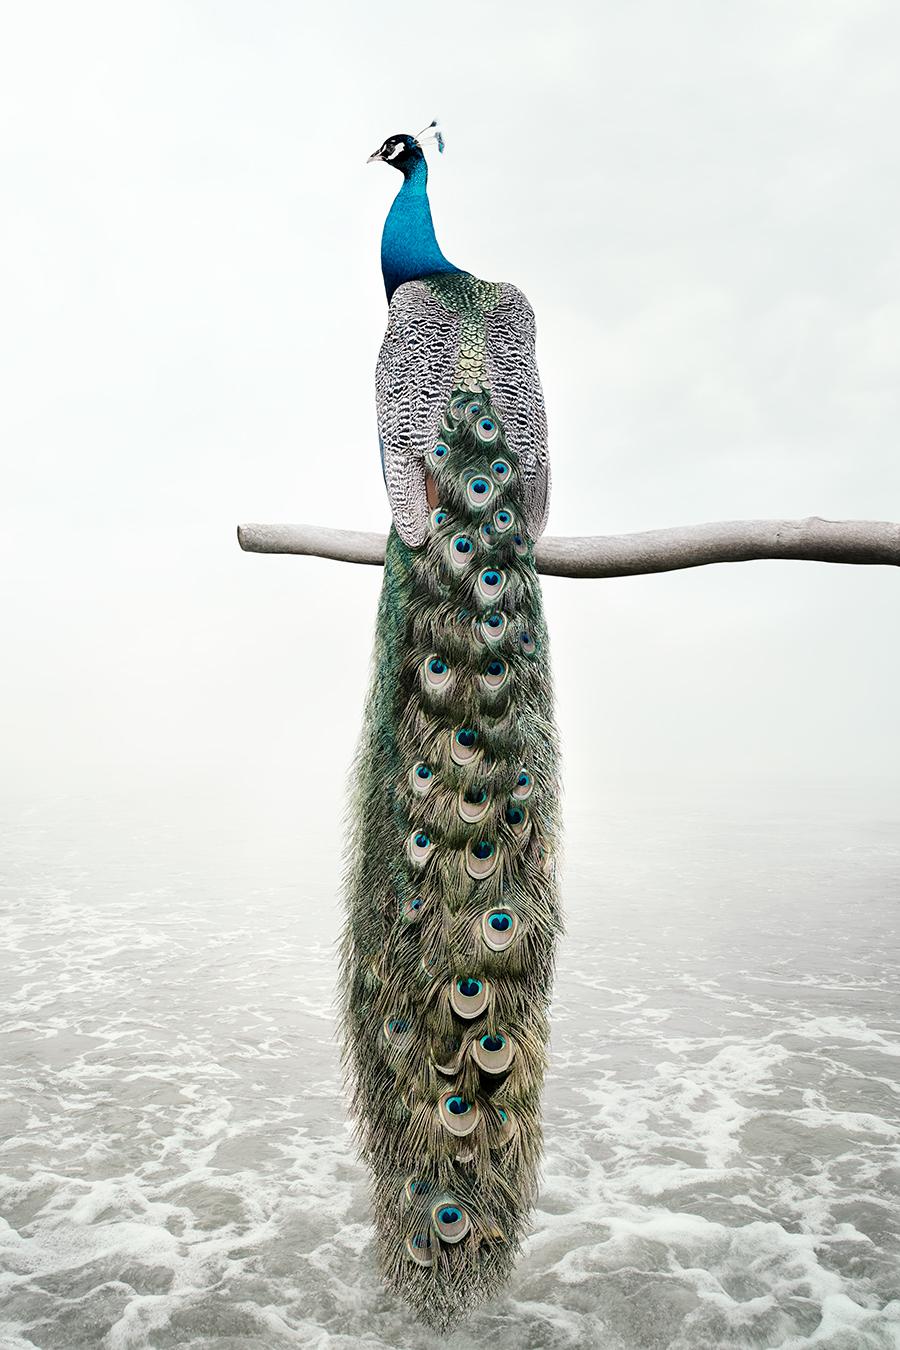 Patience Peacock
Series: Meditations
Photo-based painting on Canson Infinity Rag Photographique

Available sizes
30 x 20 in    Edition of 15
40 x 27 in     Edition of 12
60 x 40 in    Edition of 10

In this series, Zilberberg creates animal montages